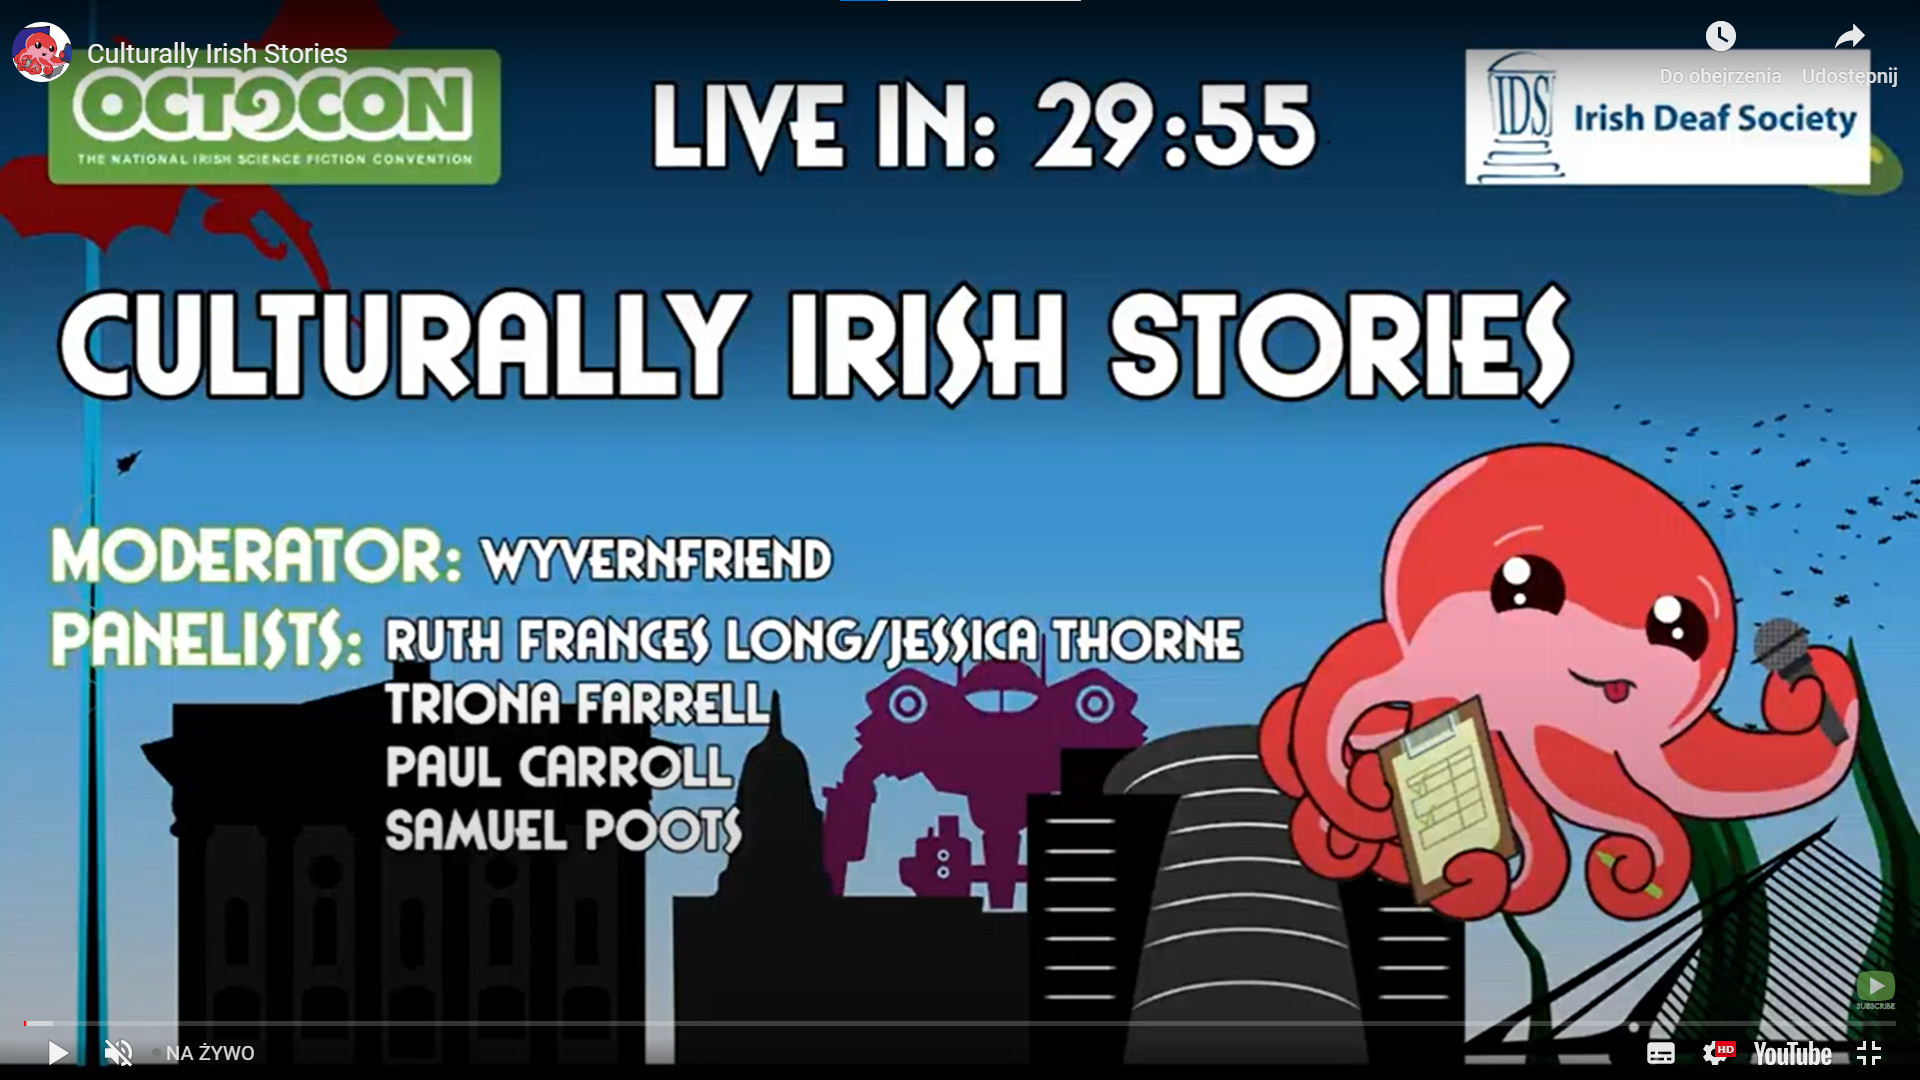 A screen from TouTube. It shows convention logo, Irish Deaf Society logo, and information about the panel and participants. The graphic in tha background shows a giant robot and some buildings in Dublin. There is also an octopus holding a microphone.